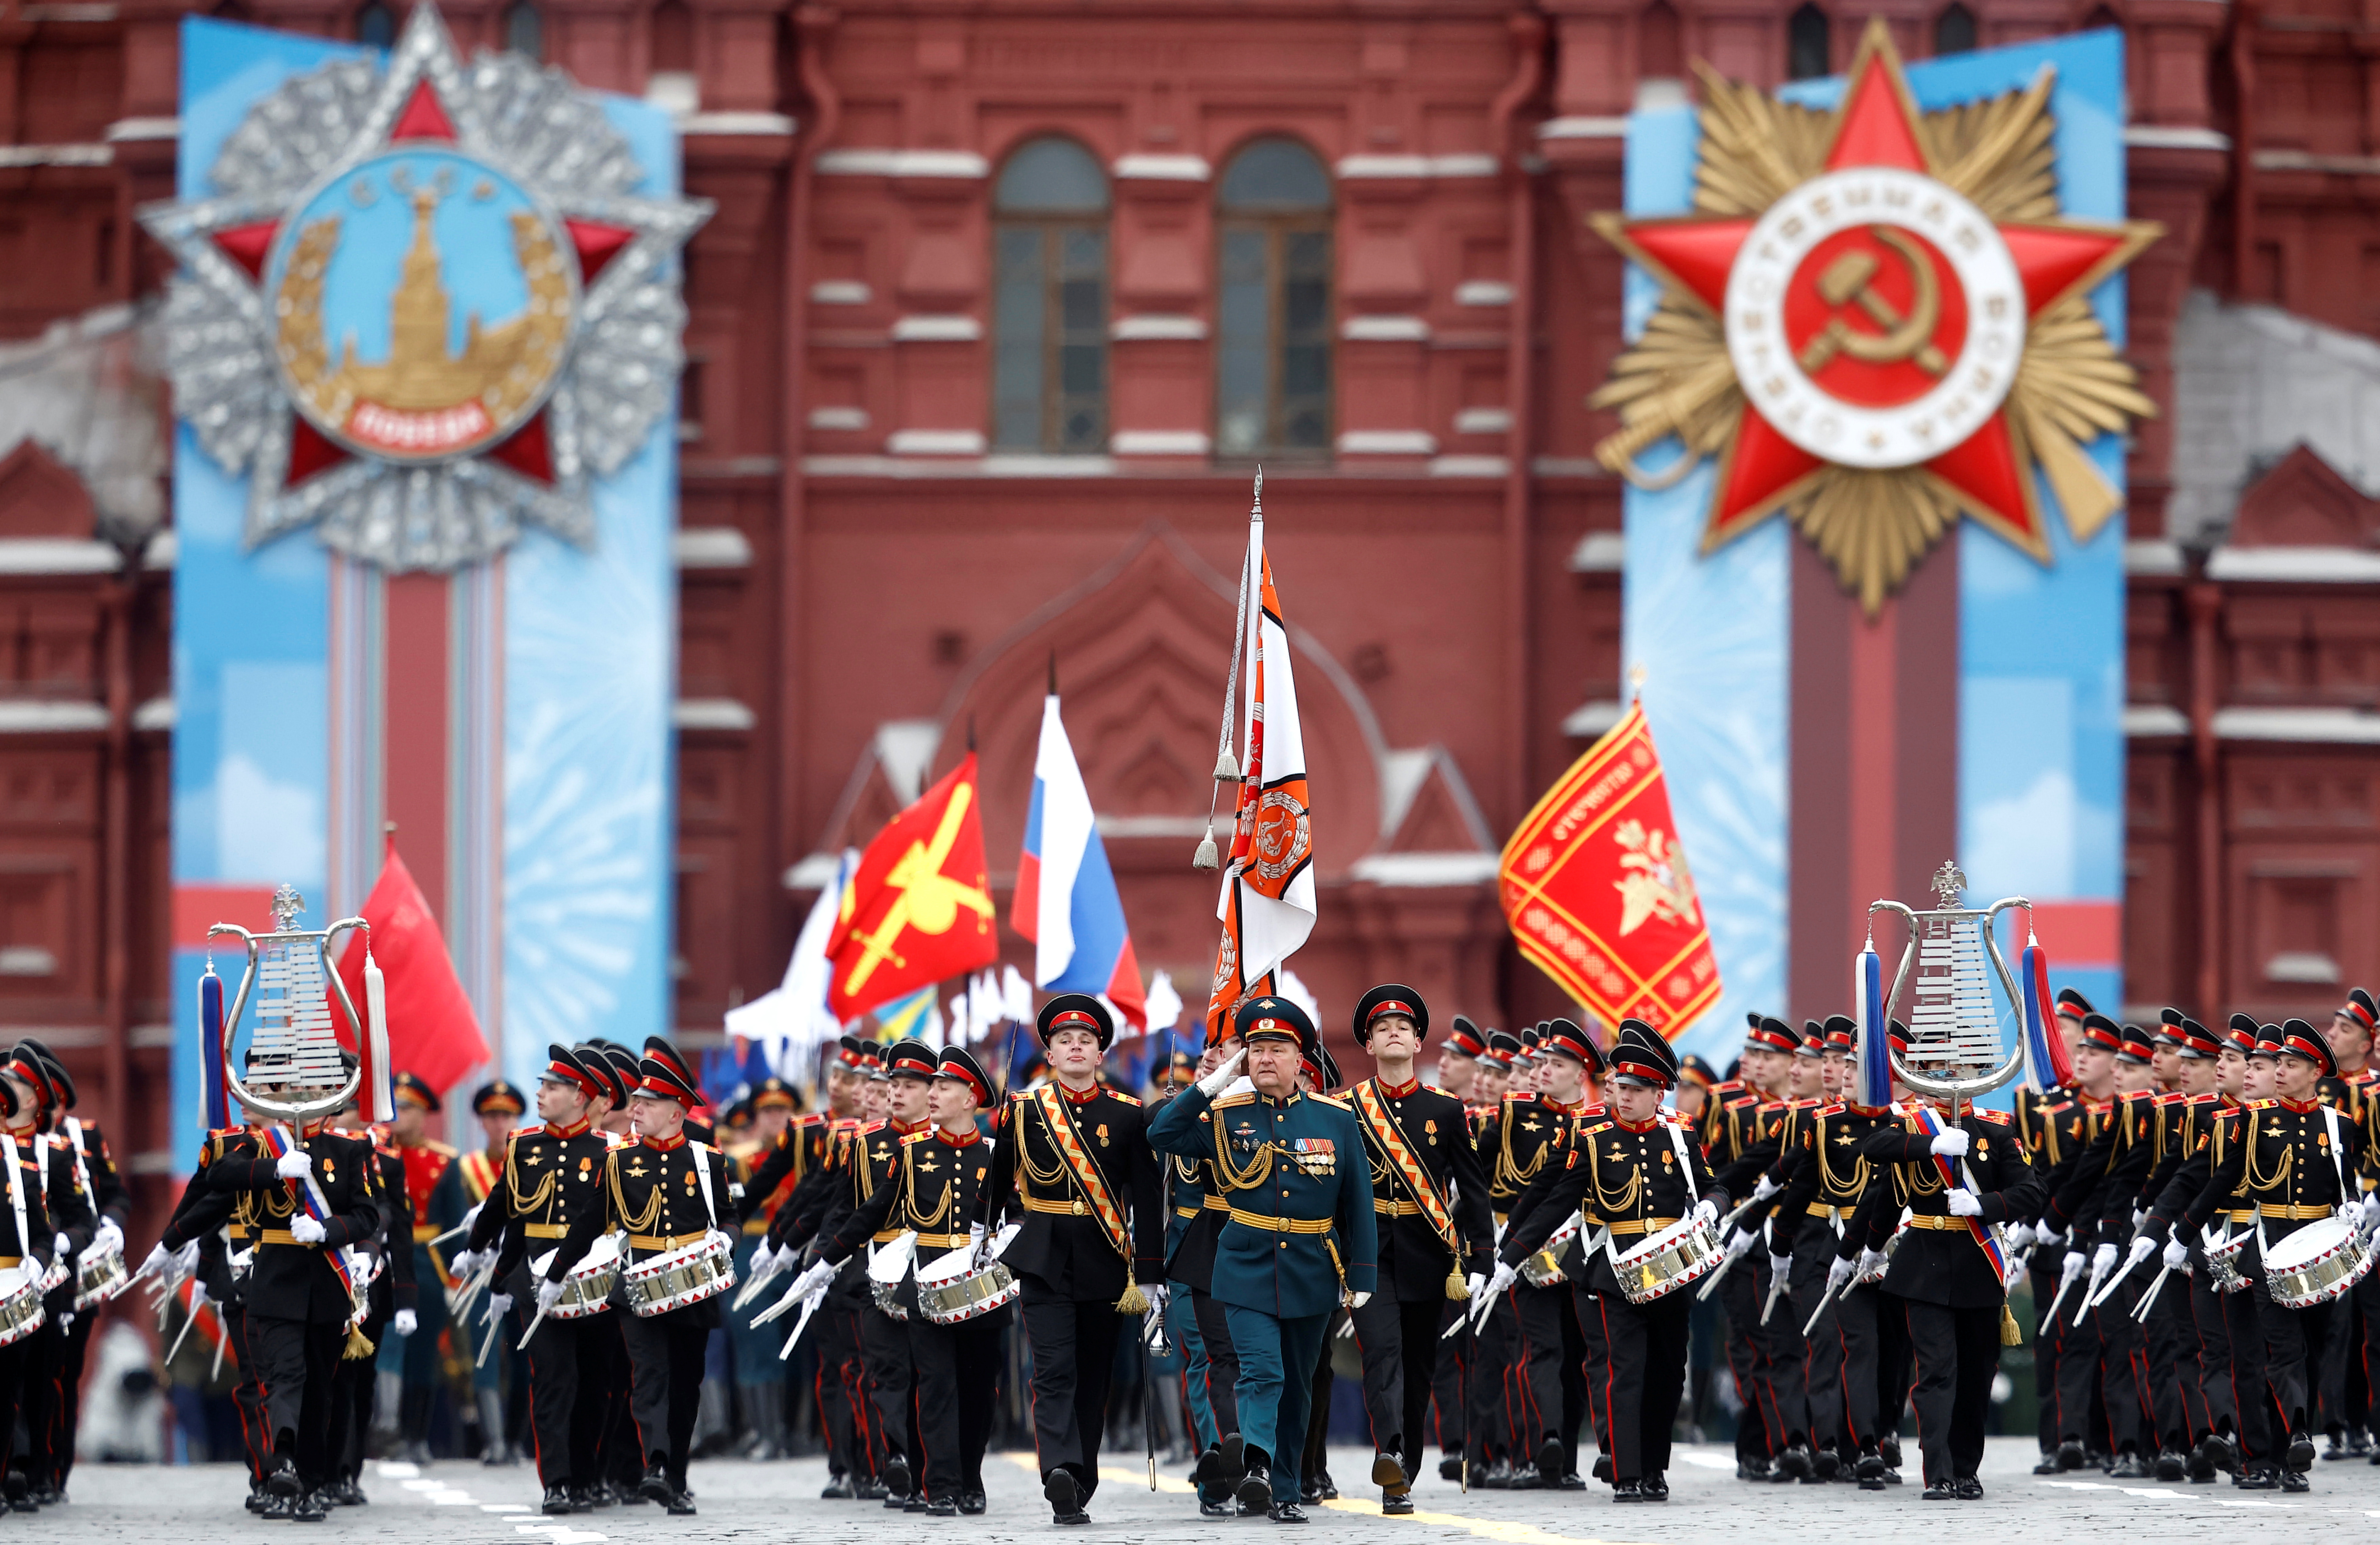 Russian service members and cadets march during a military parade on Victory Day, which marks the 76th anniversary of the victory over Nazi Germany in World War Two, in Red Square in central Moscow, Russia May 9, 2021. REUTERS/Maxim Shemetov